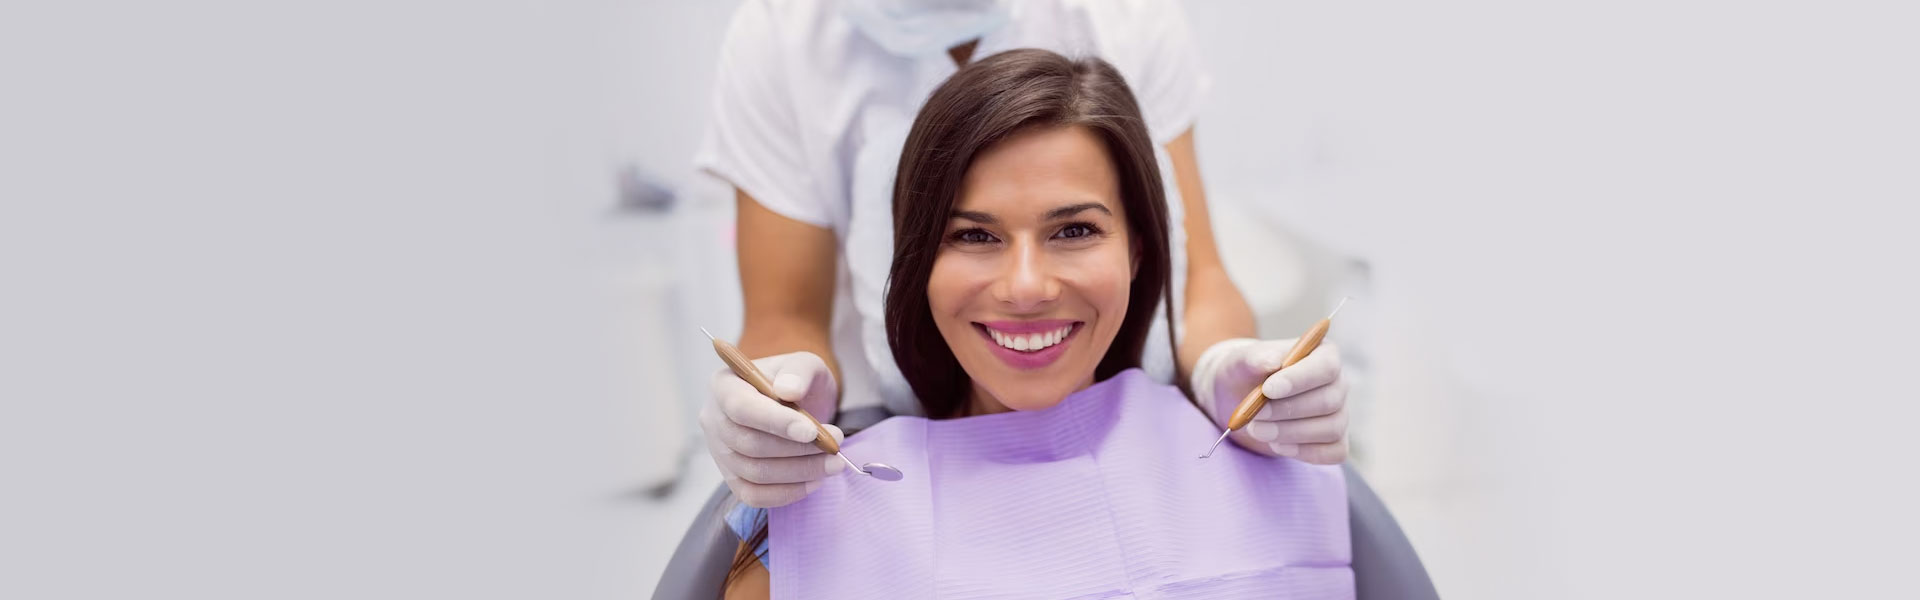 How Dental Bonding Can Fix Chipped Teeth and Restore Your Confidence?